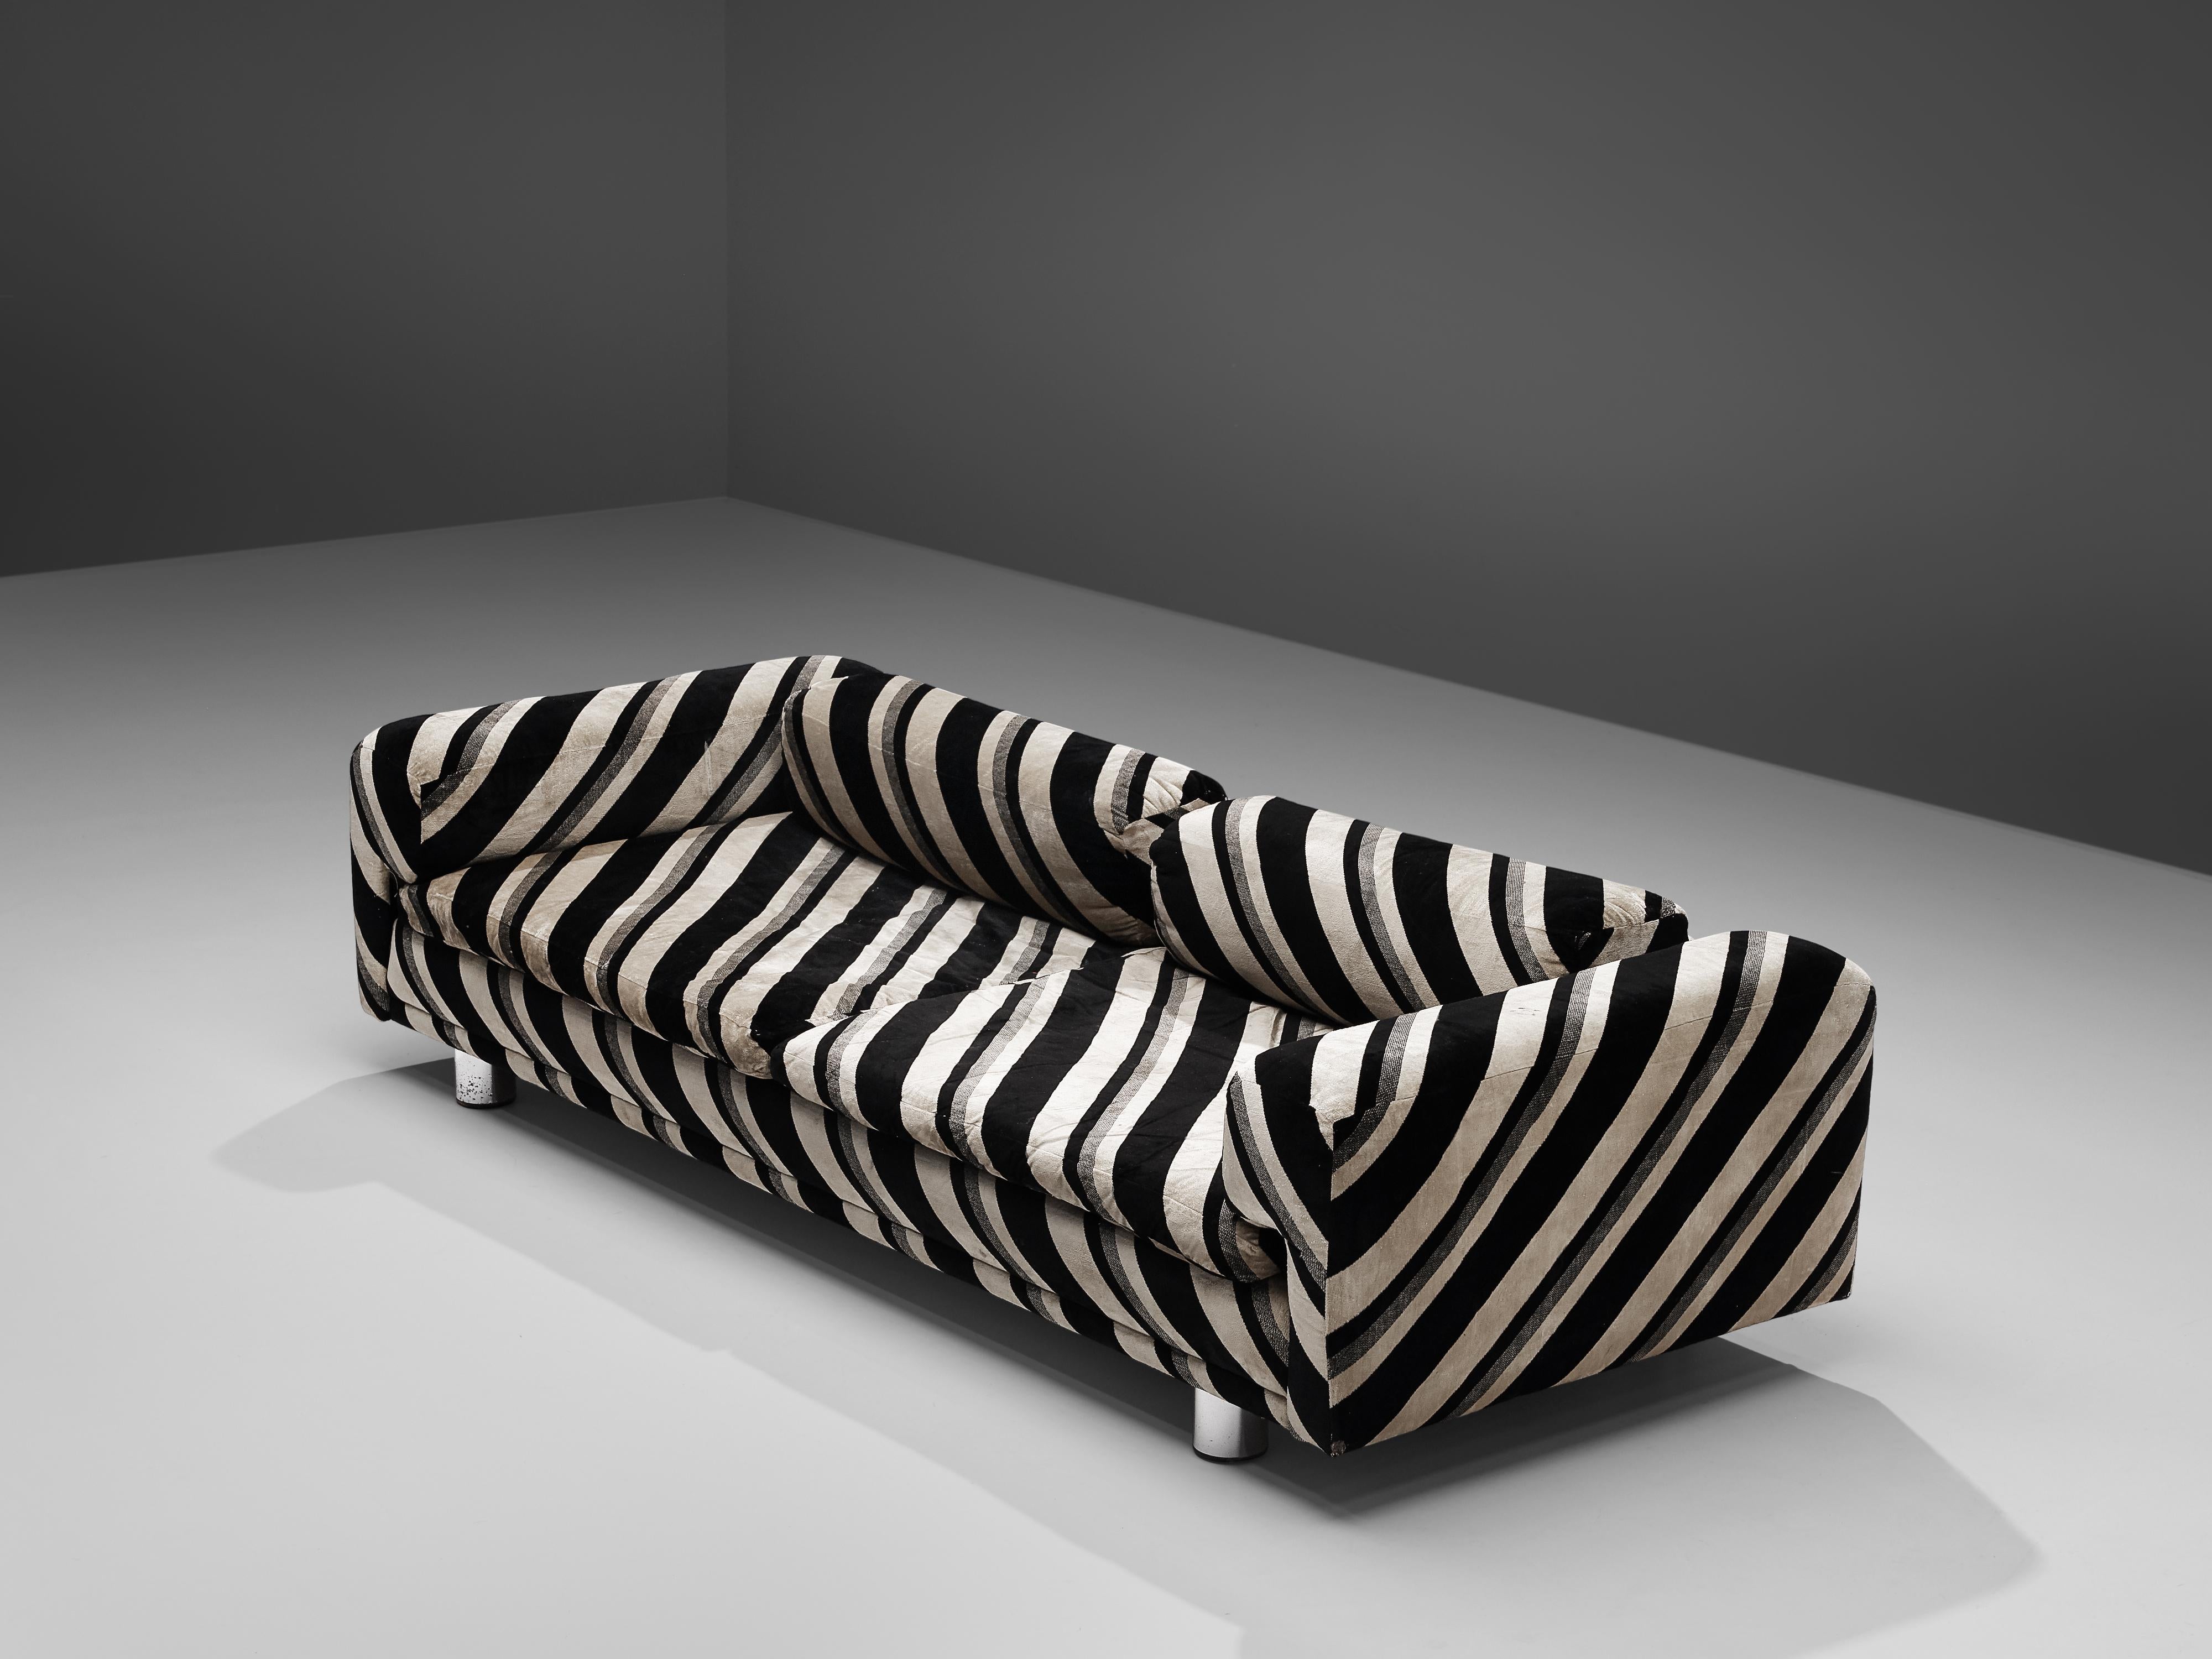 Howard Keith for HK Furniture, 'Diplomat' sofa, black and beige striped fabric, metal, United Kingdom, 1970s.

Grand voluptuous 'Diplomat' sofas by Howard Keith for HK Furniture, designed in the 1970s. This sofa with a deep seat is a true delight